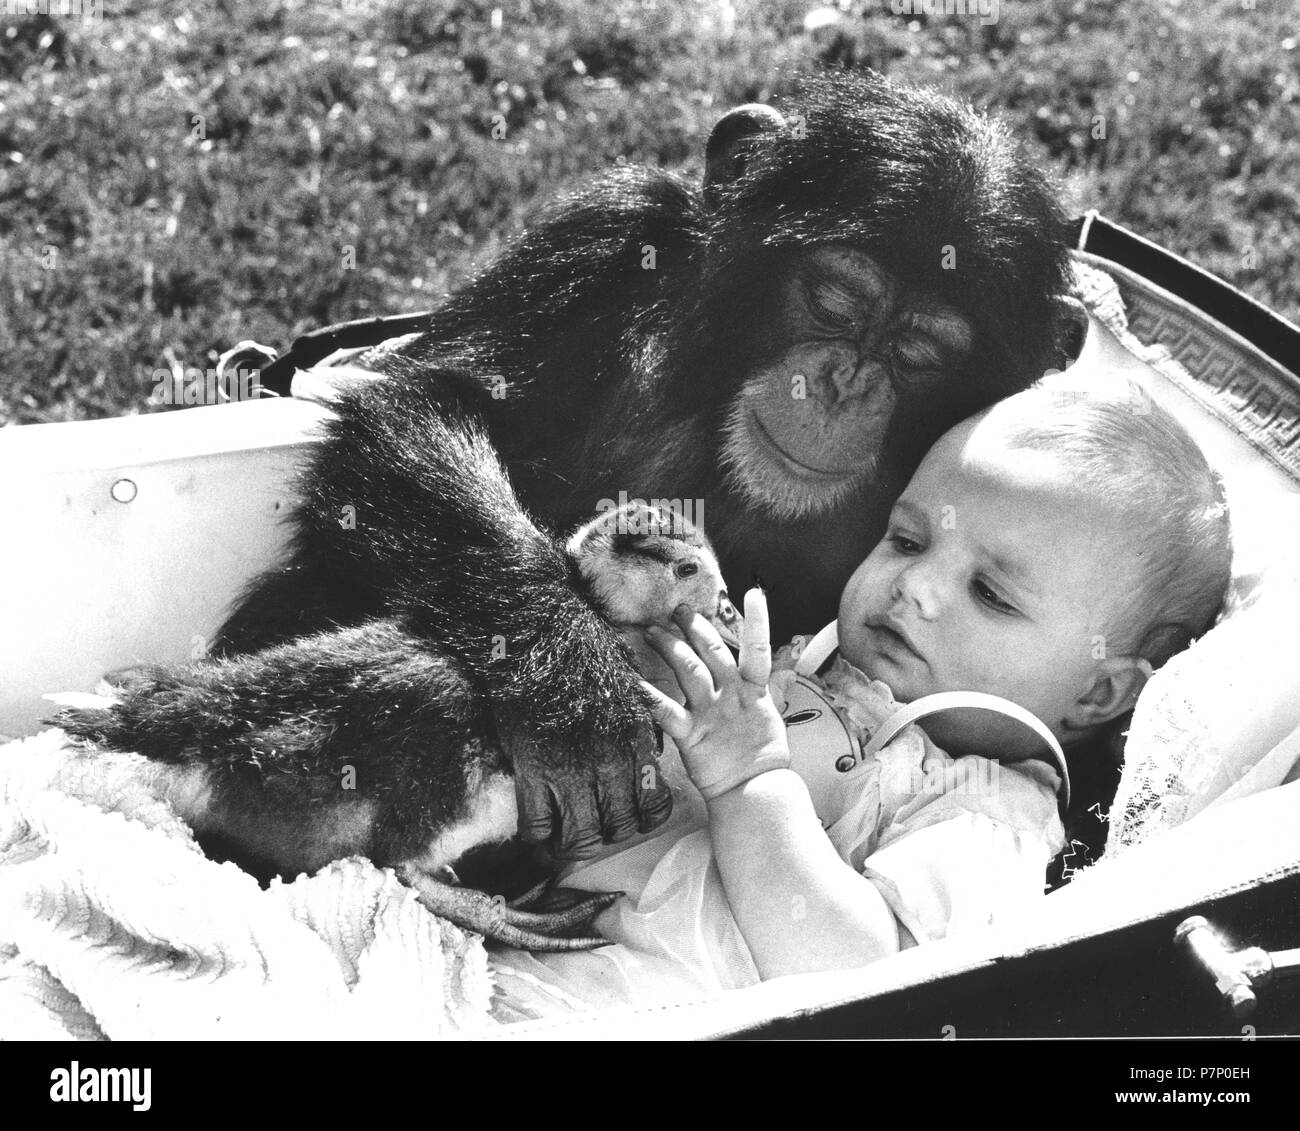 Chimpanzee cuddles with a baby and a duck, England, Great Britain Stock Photo